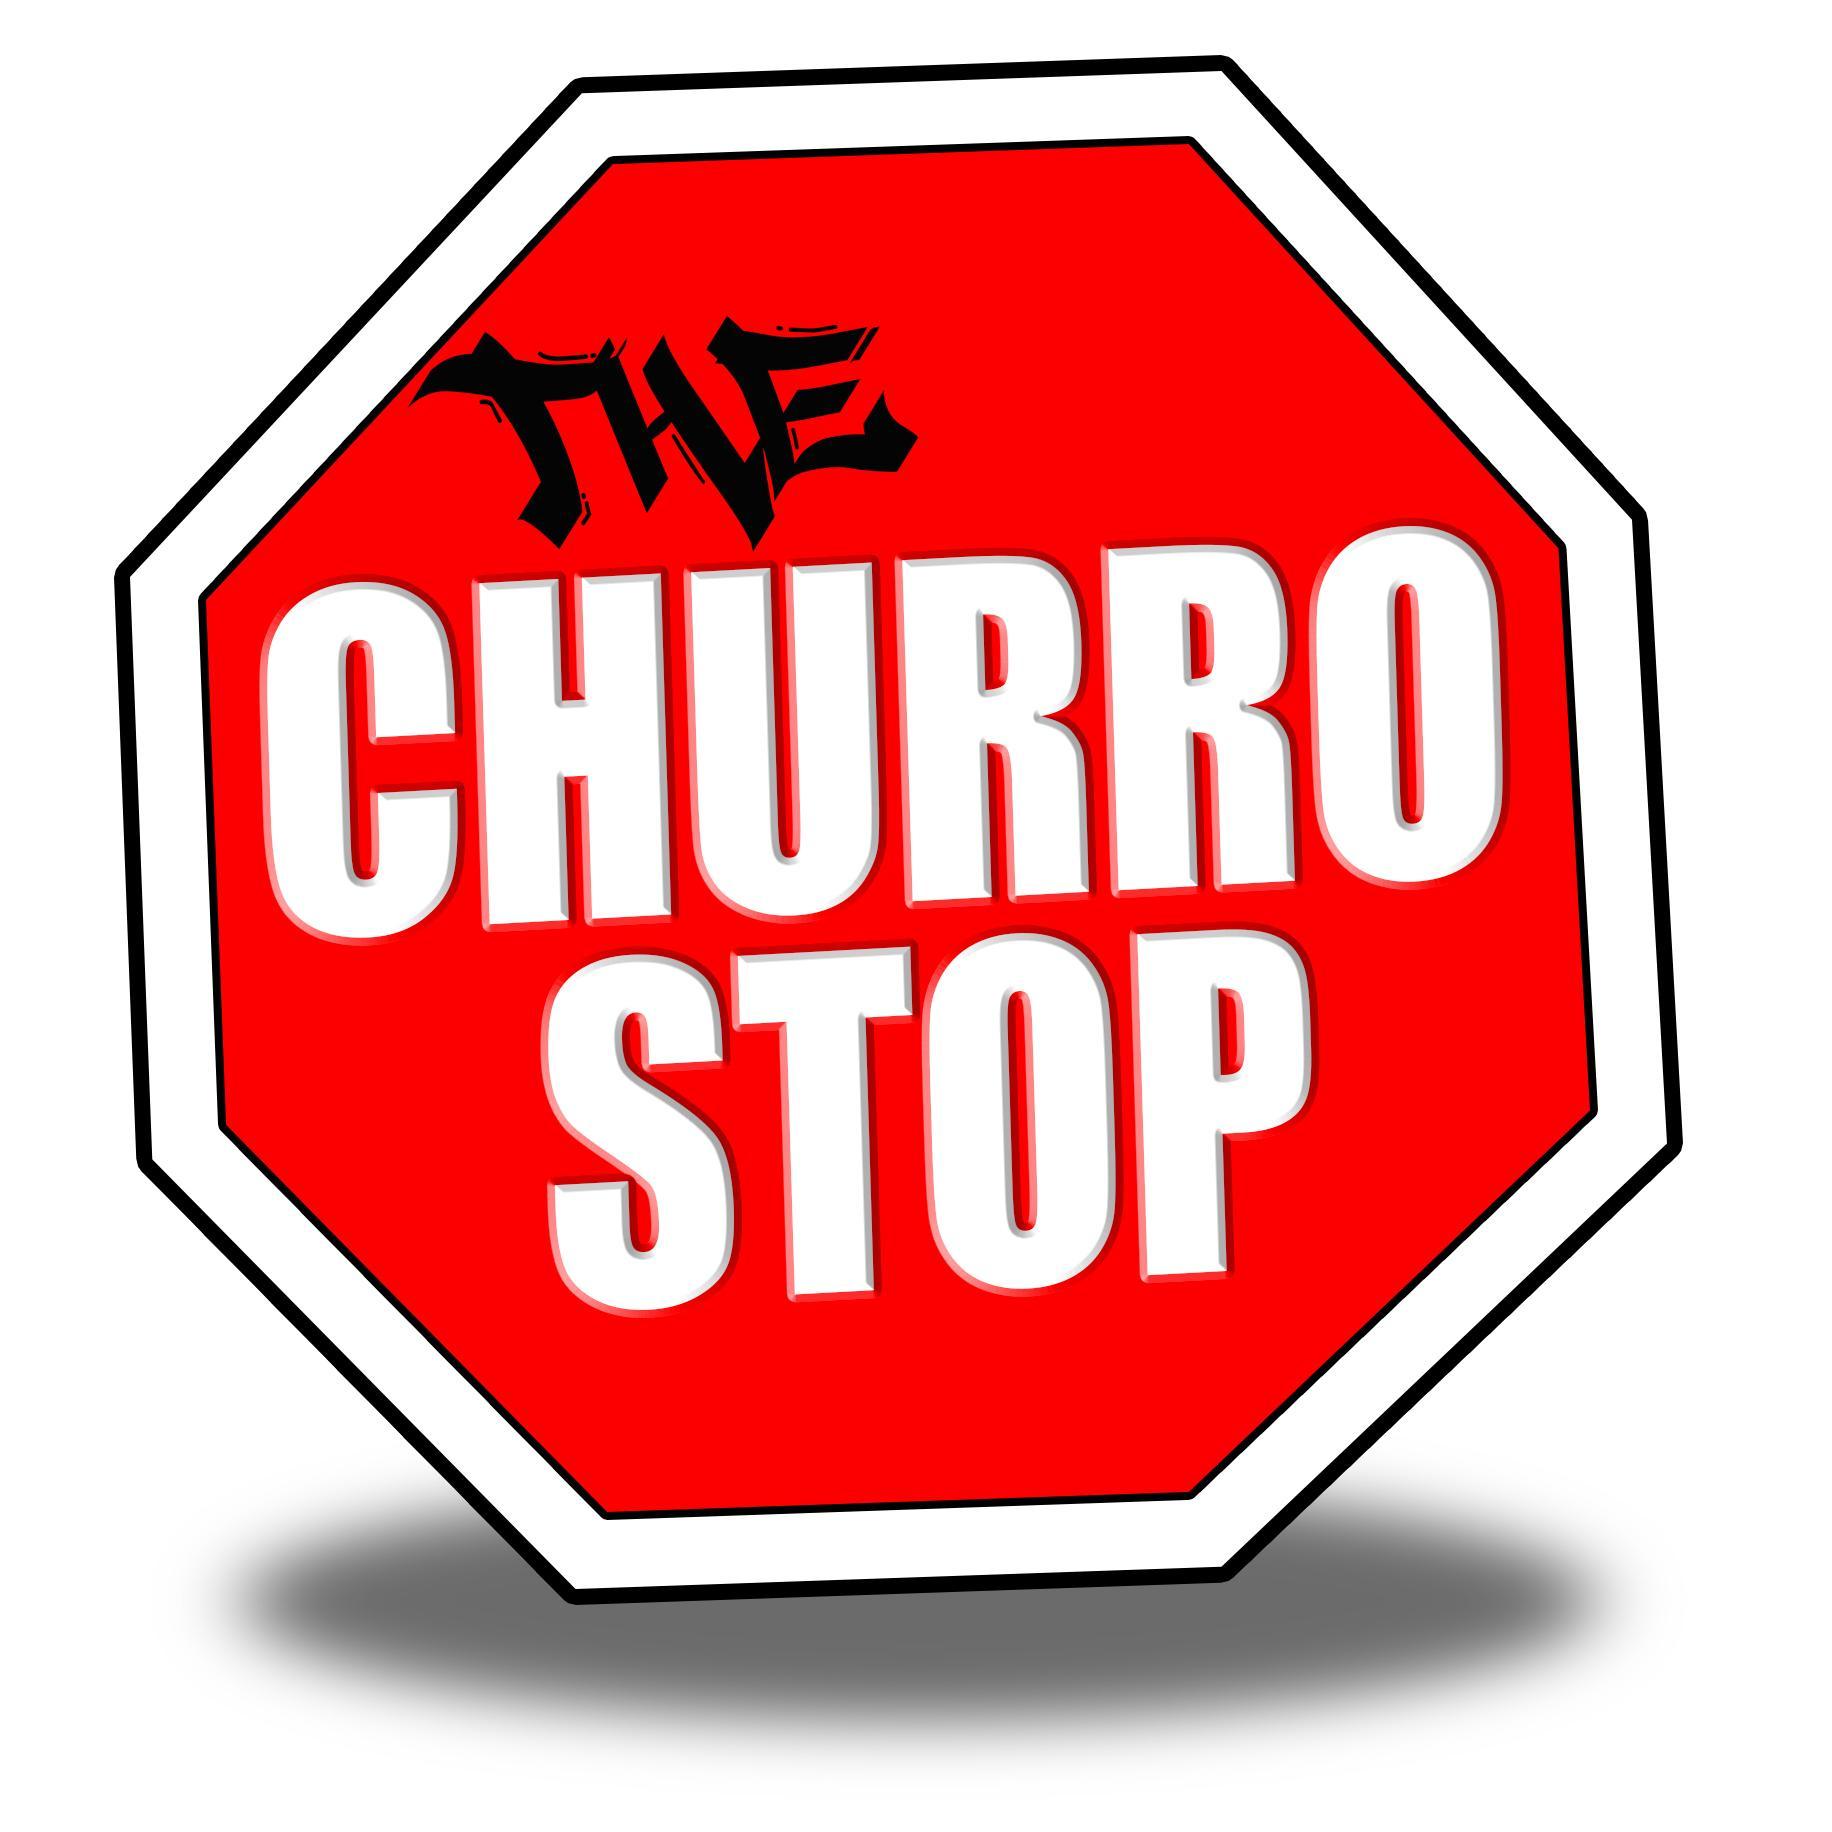 Winnipeg food truck offering the best churros in the prairies! Follow for daily locations!